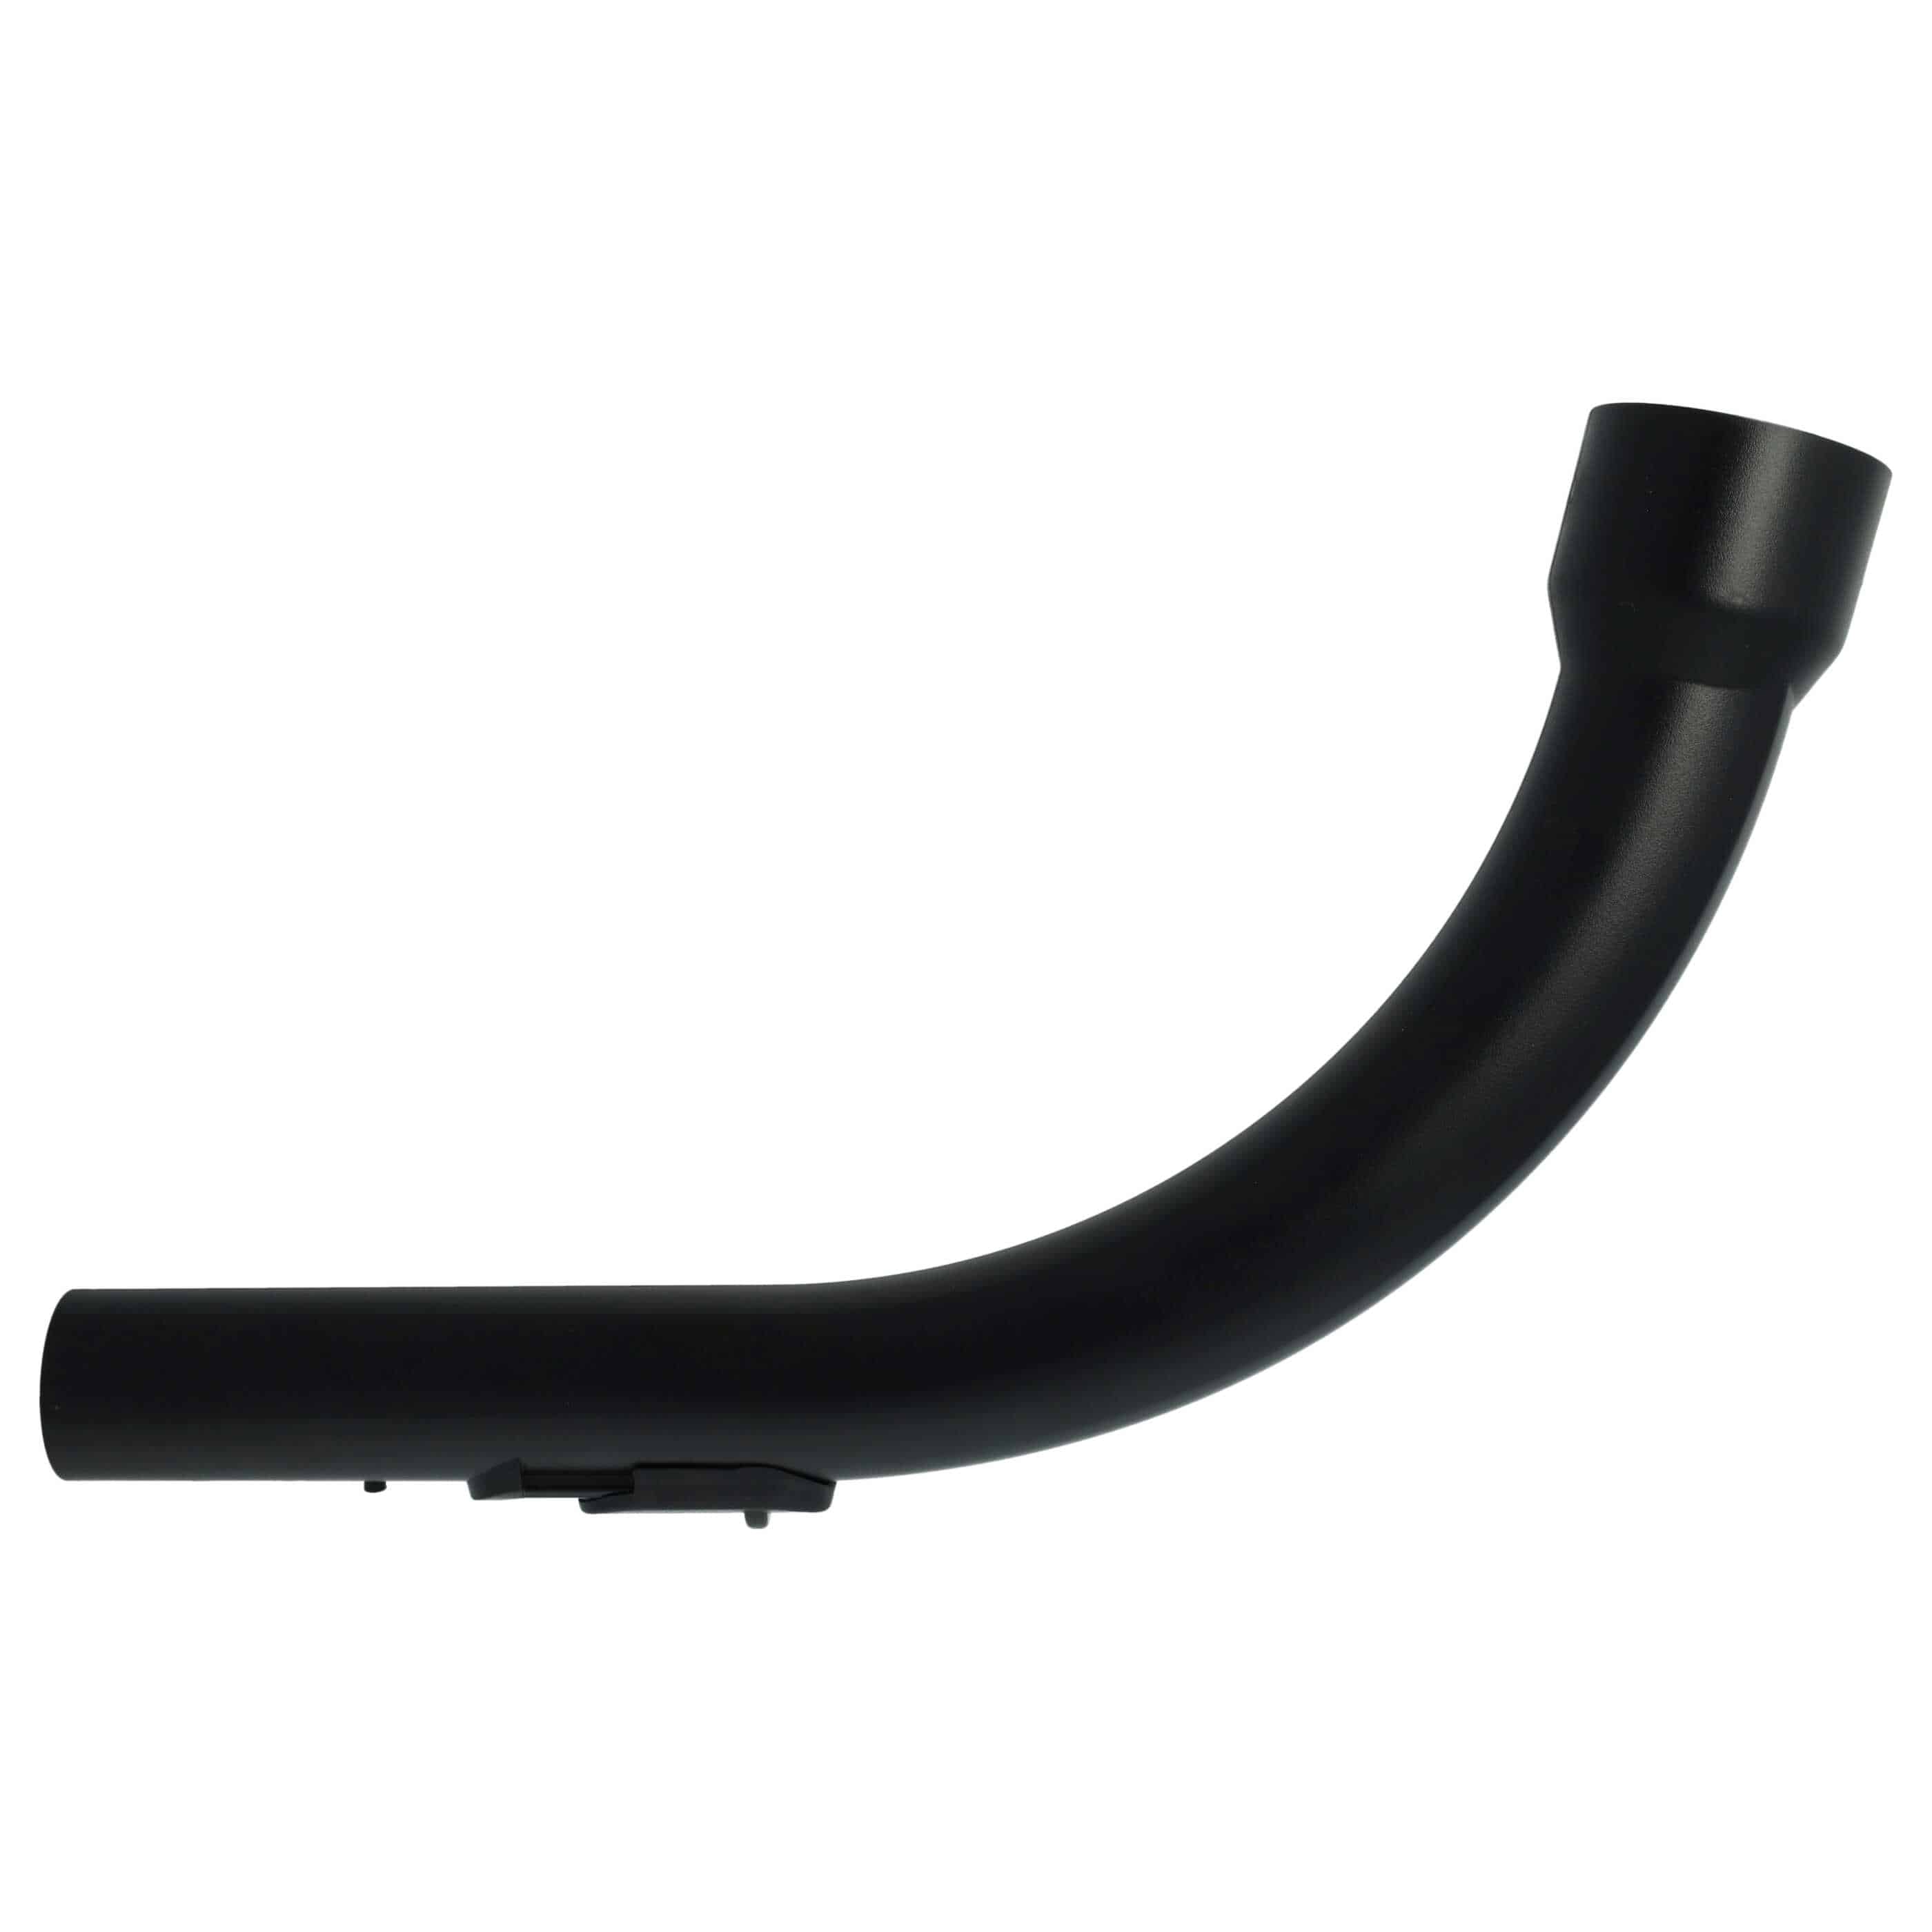 Vacuum Cleaner Handle as Replacement for Miele Vacuum Cleaner Handle 52690919442601 35 mm Diameter